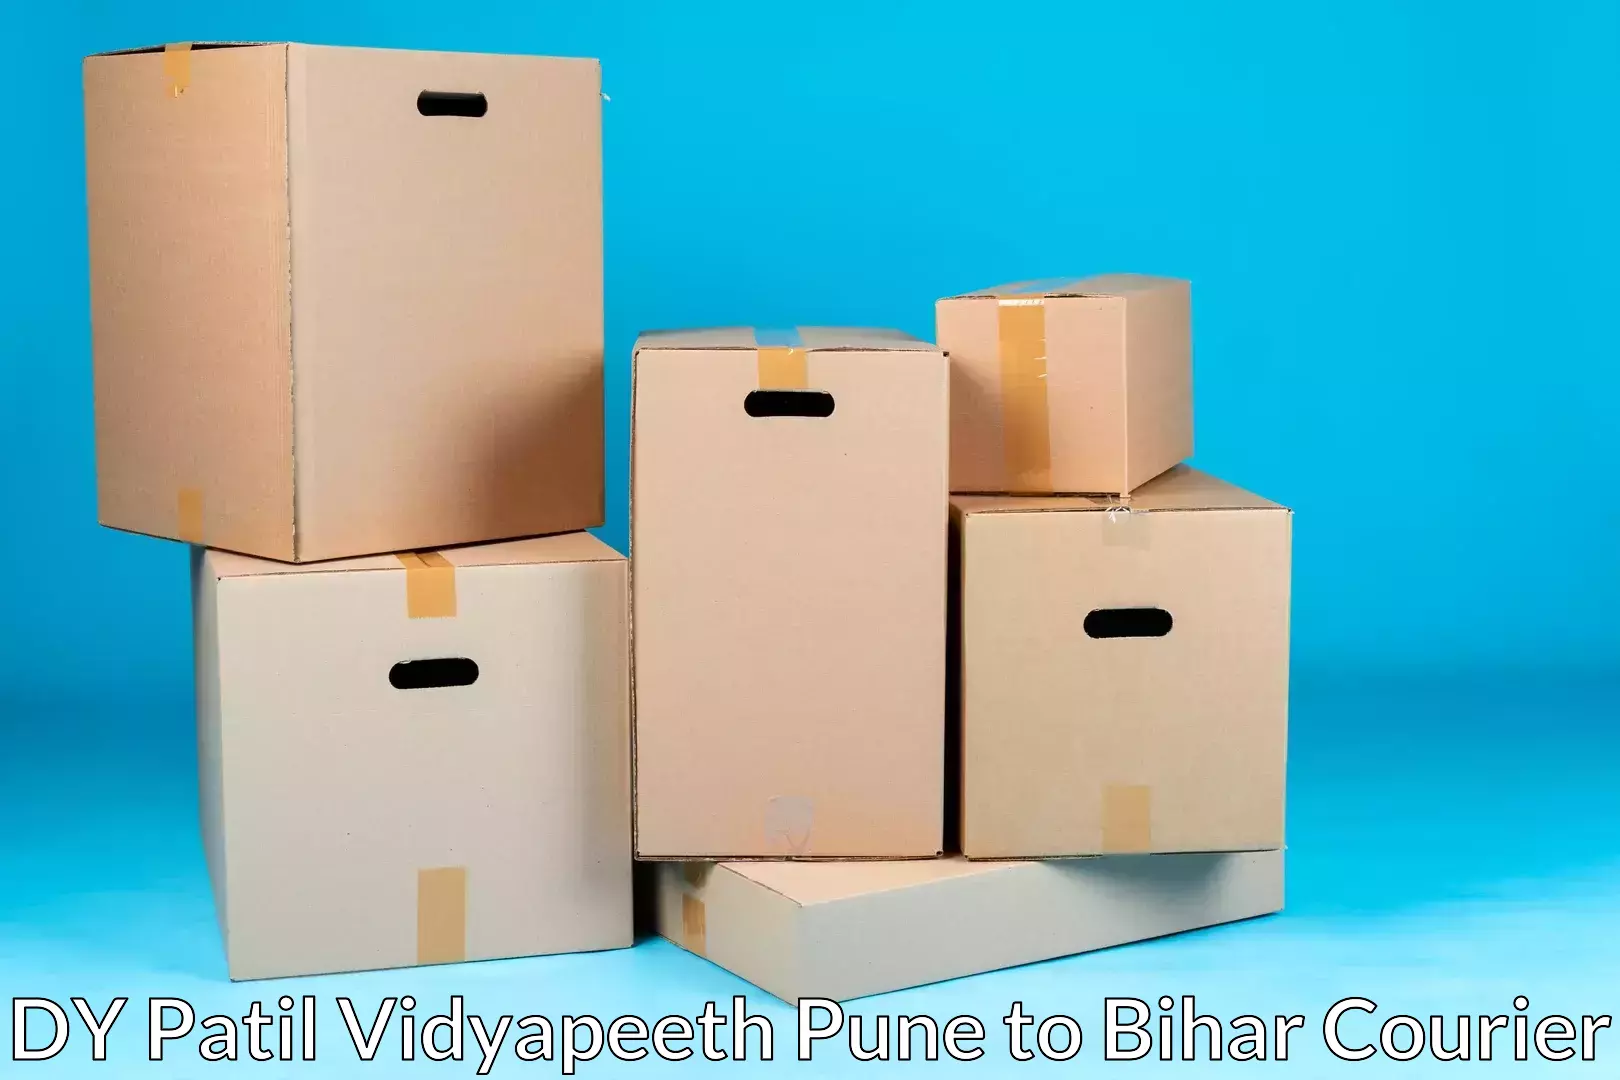 Home relocation experts DY Patil Vidyapeeth Pune to Sharfuddinpur